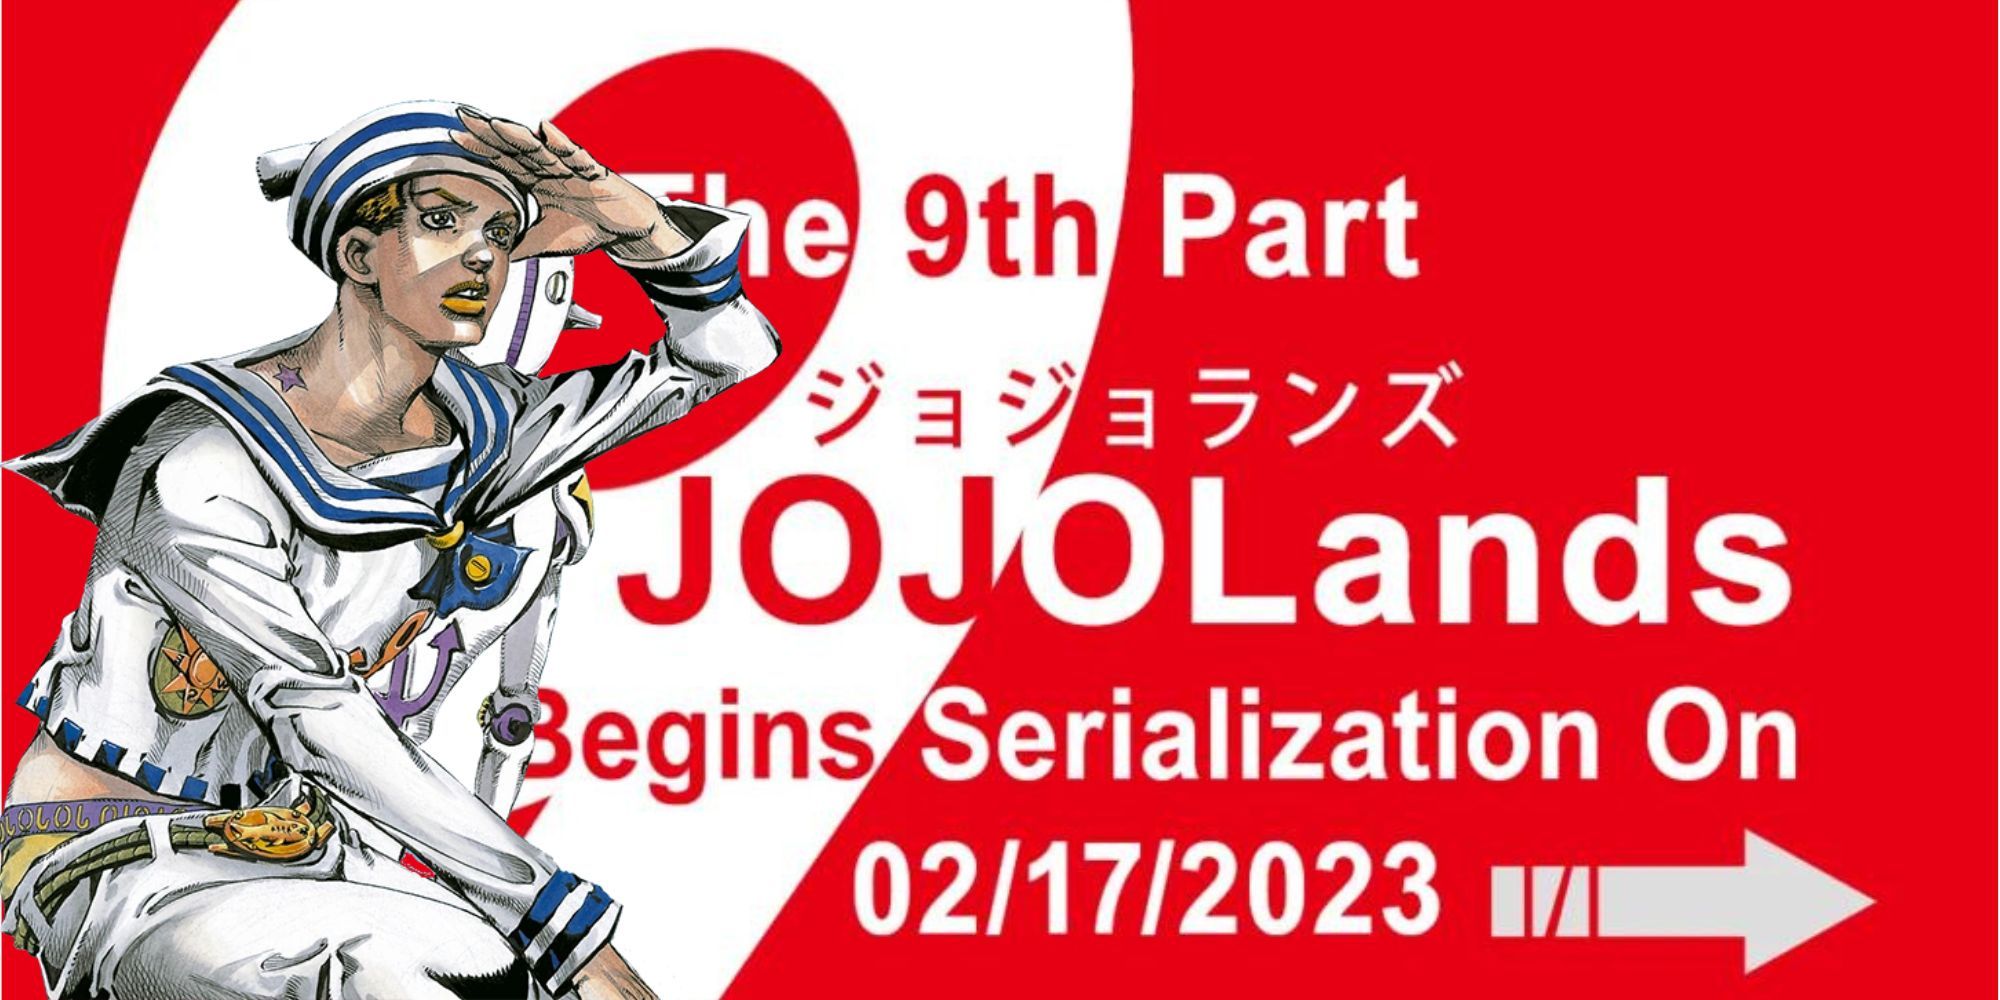 Jojo part 9 jojolands might be the end of the series